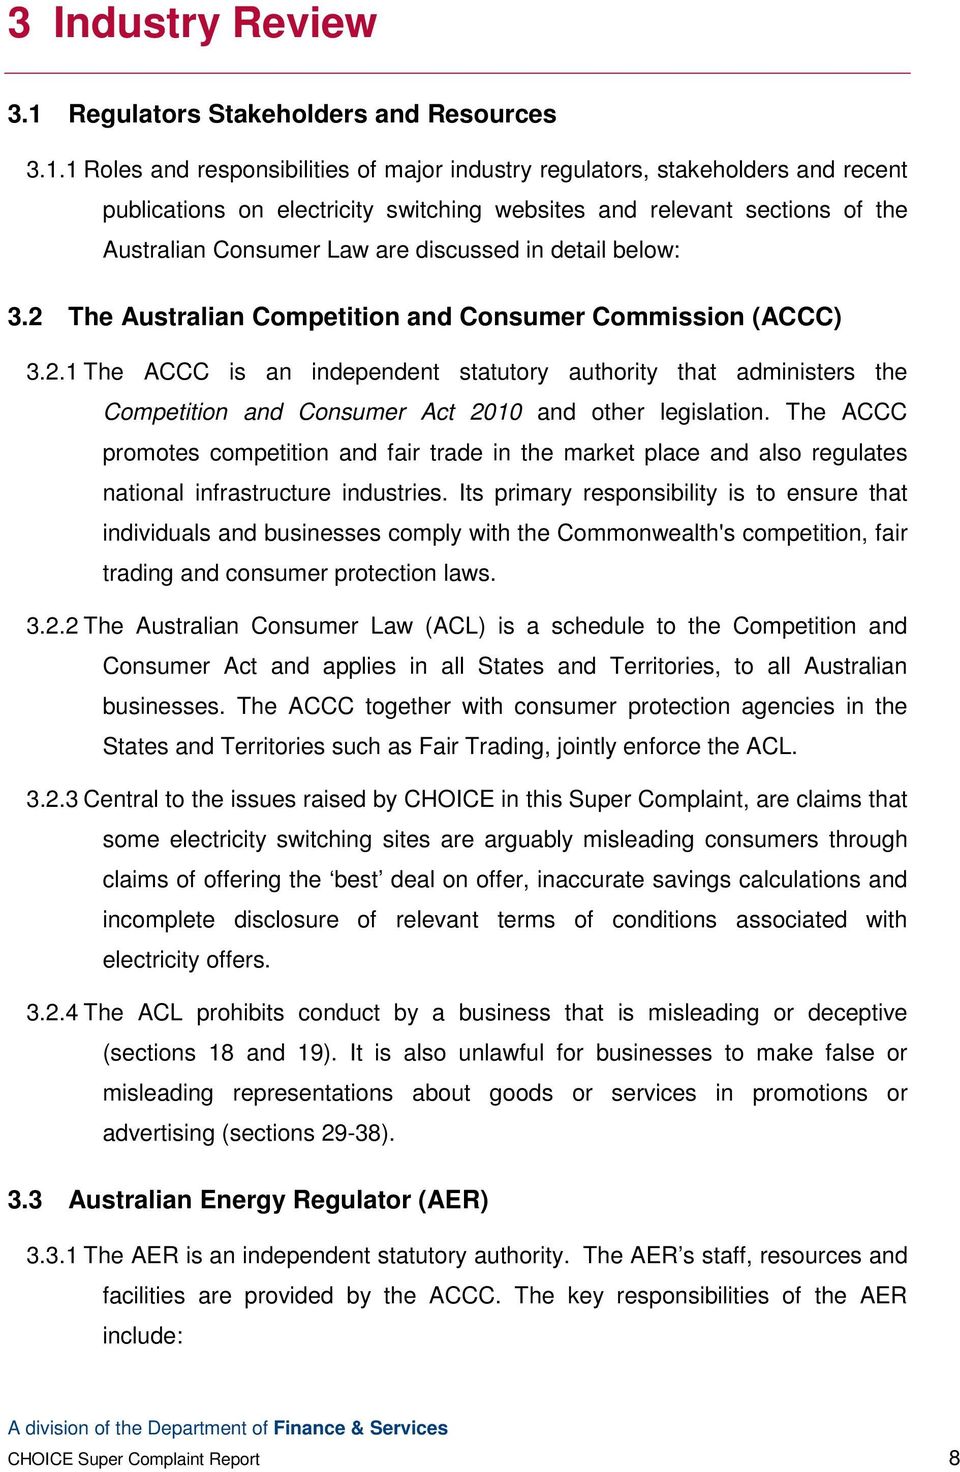 1 Roles and responsibilities of major industry regulators, stakeholders and recent publications on electricity switching websites and relevant sections of the Australian Consumer Law are discussed in